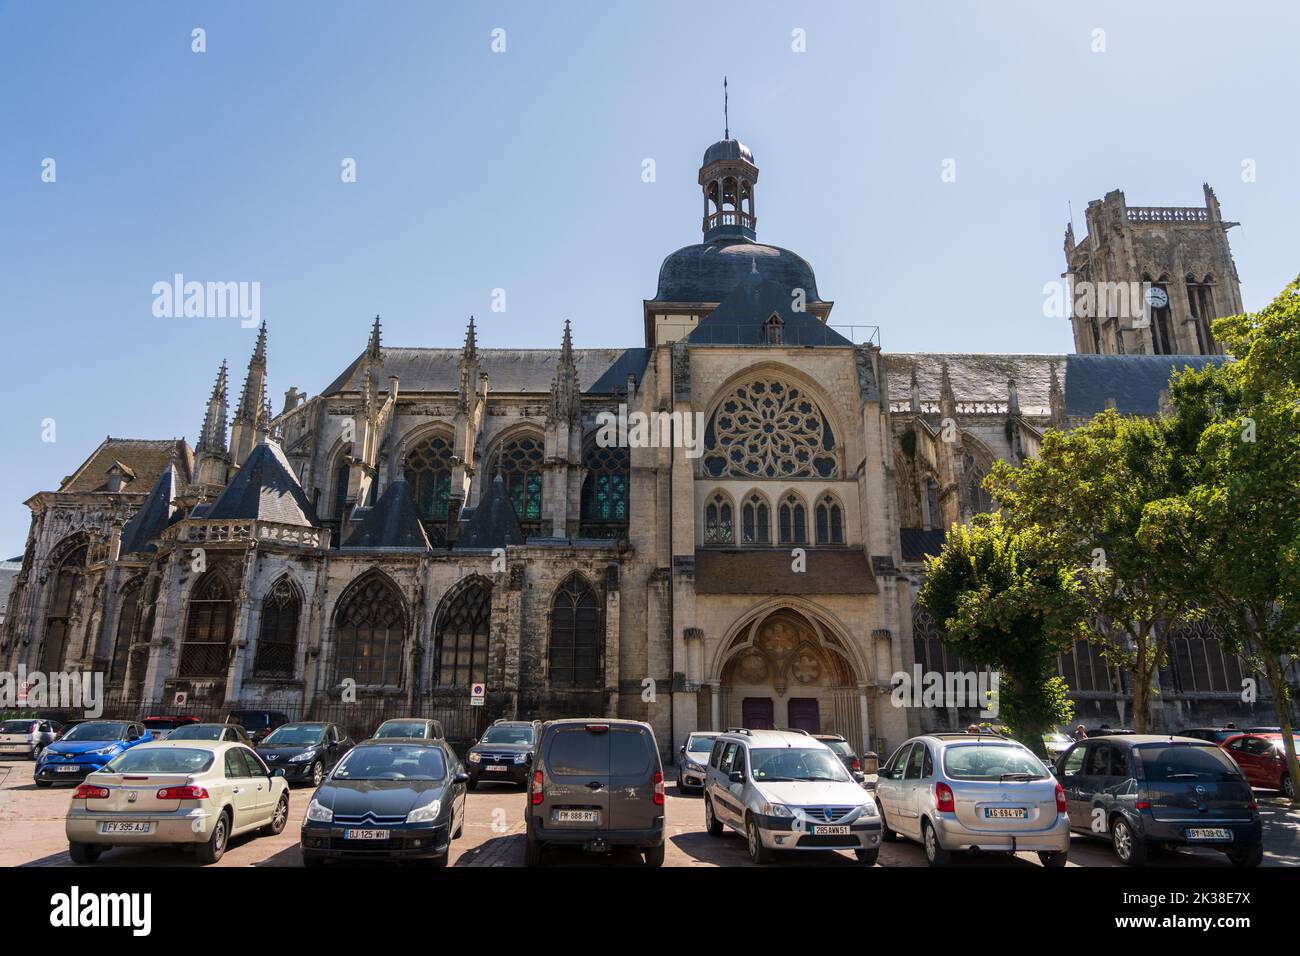 Eglise Saint-Jacques in Dieppe, Normandy, France Stock Photo